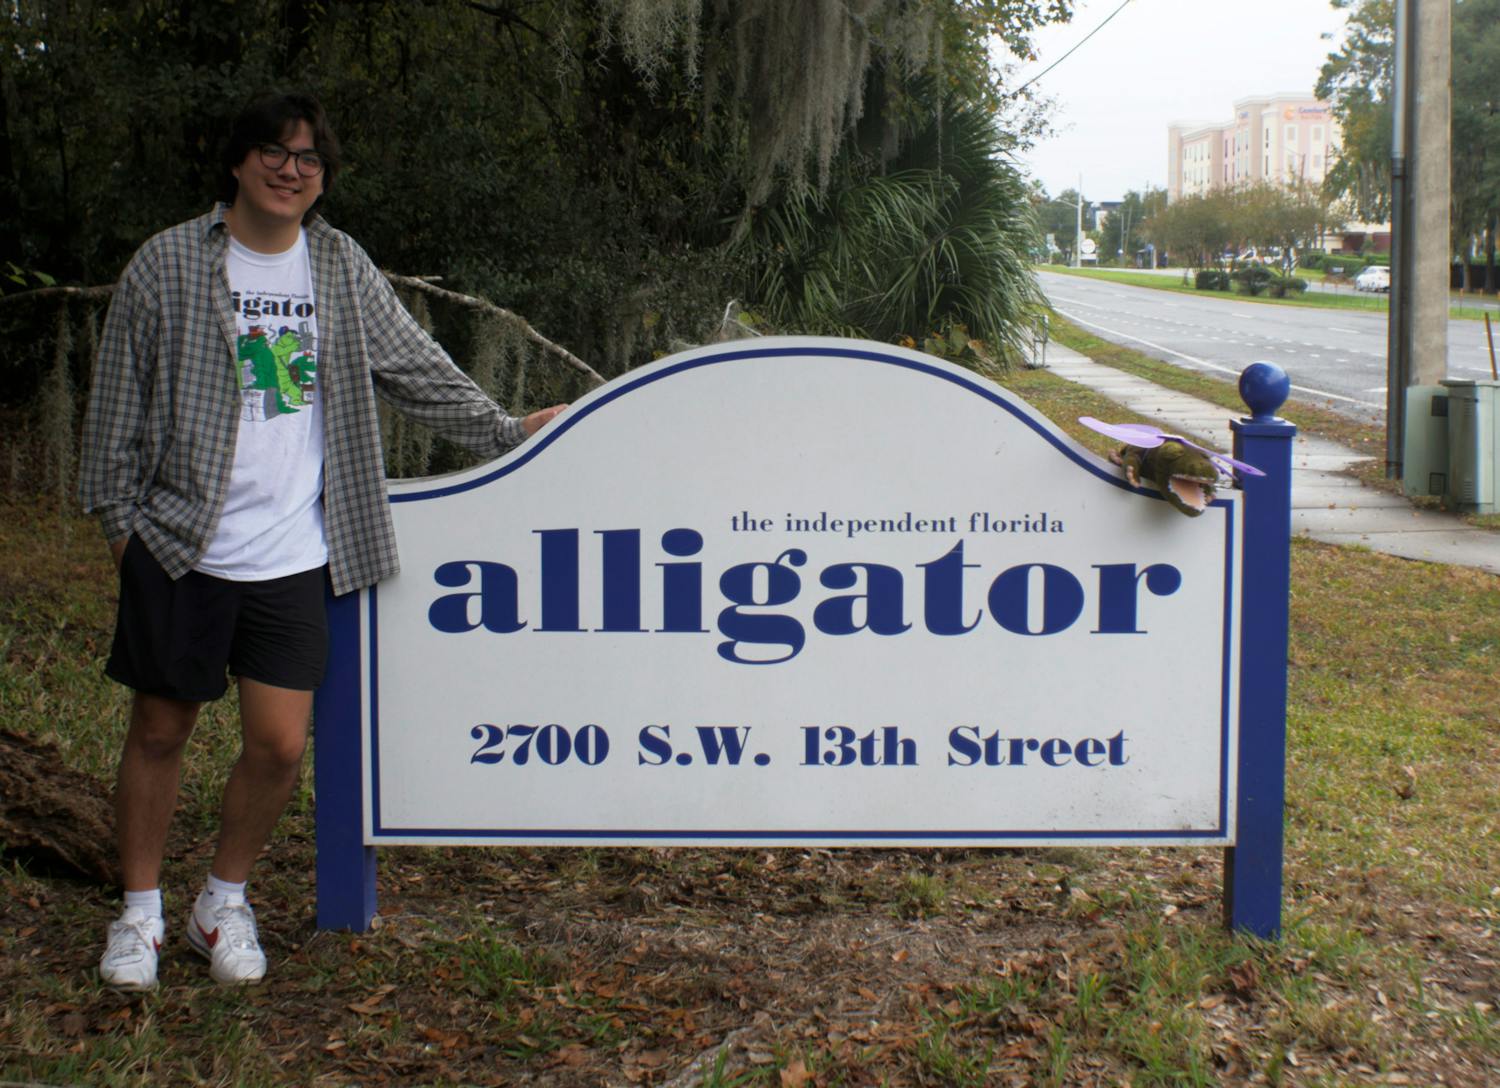 Jackson Reyes was the Fall 2023 sports editor and the Summer 2023 Digital Managing Editor at The Independent Florida Alligator.